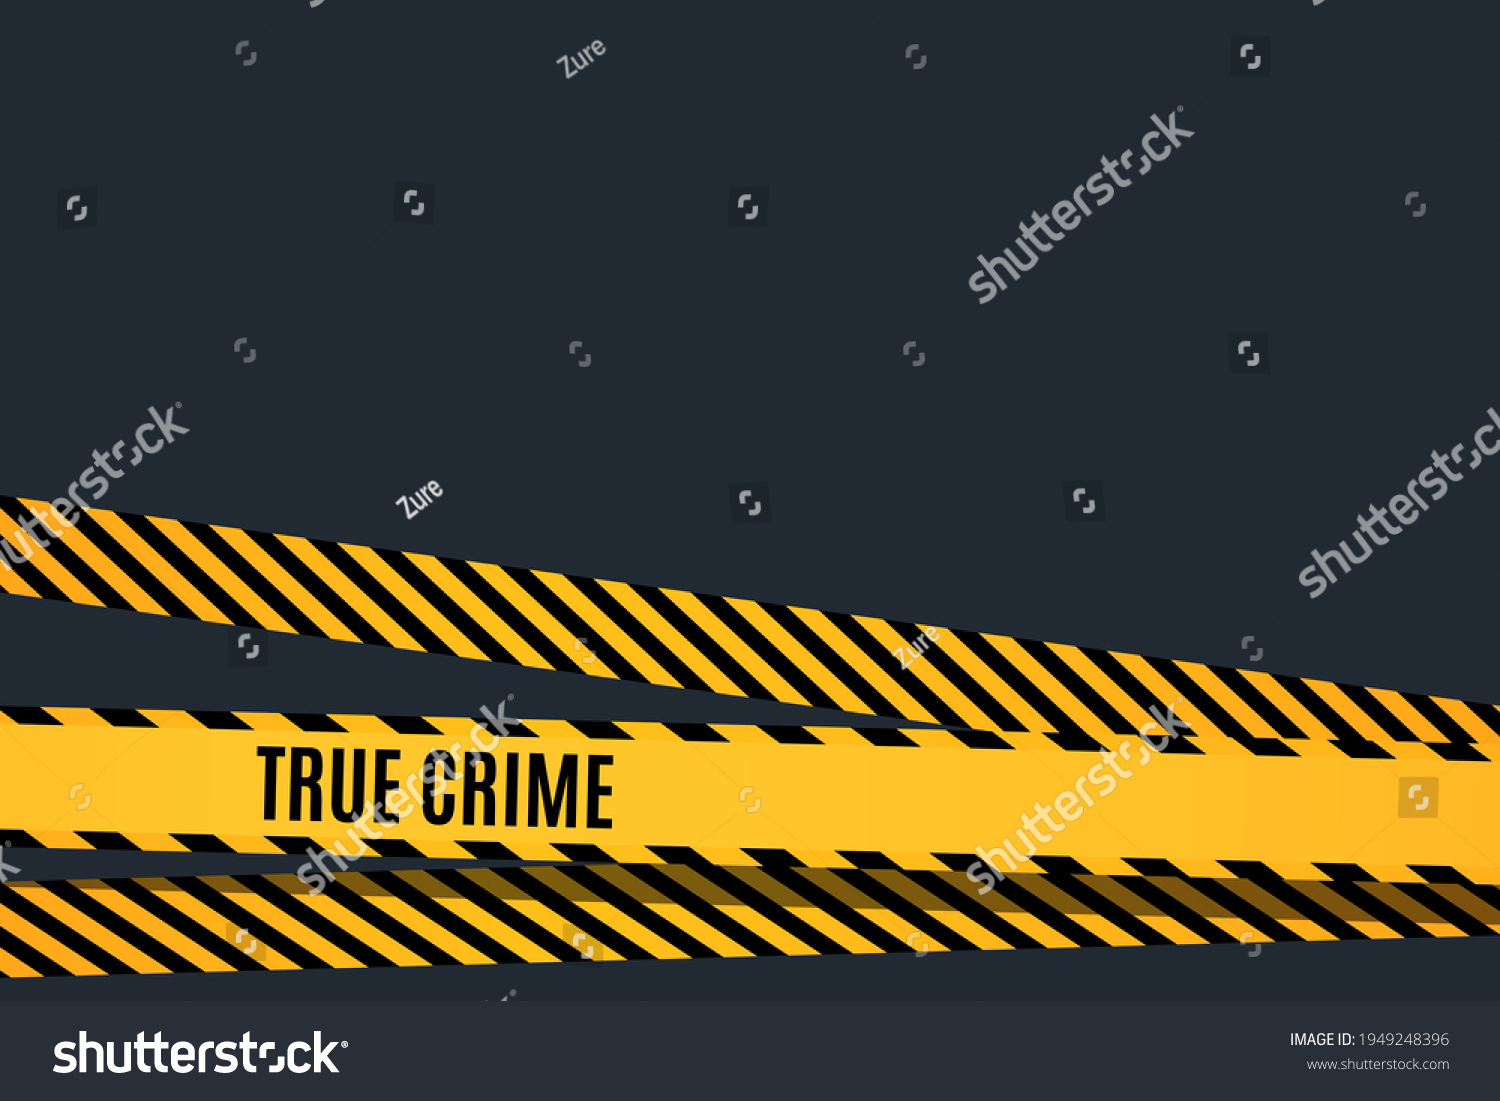 SVG of Crime investigation movie screen saver template with yellow and black ribbon. Vector illustration. svg